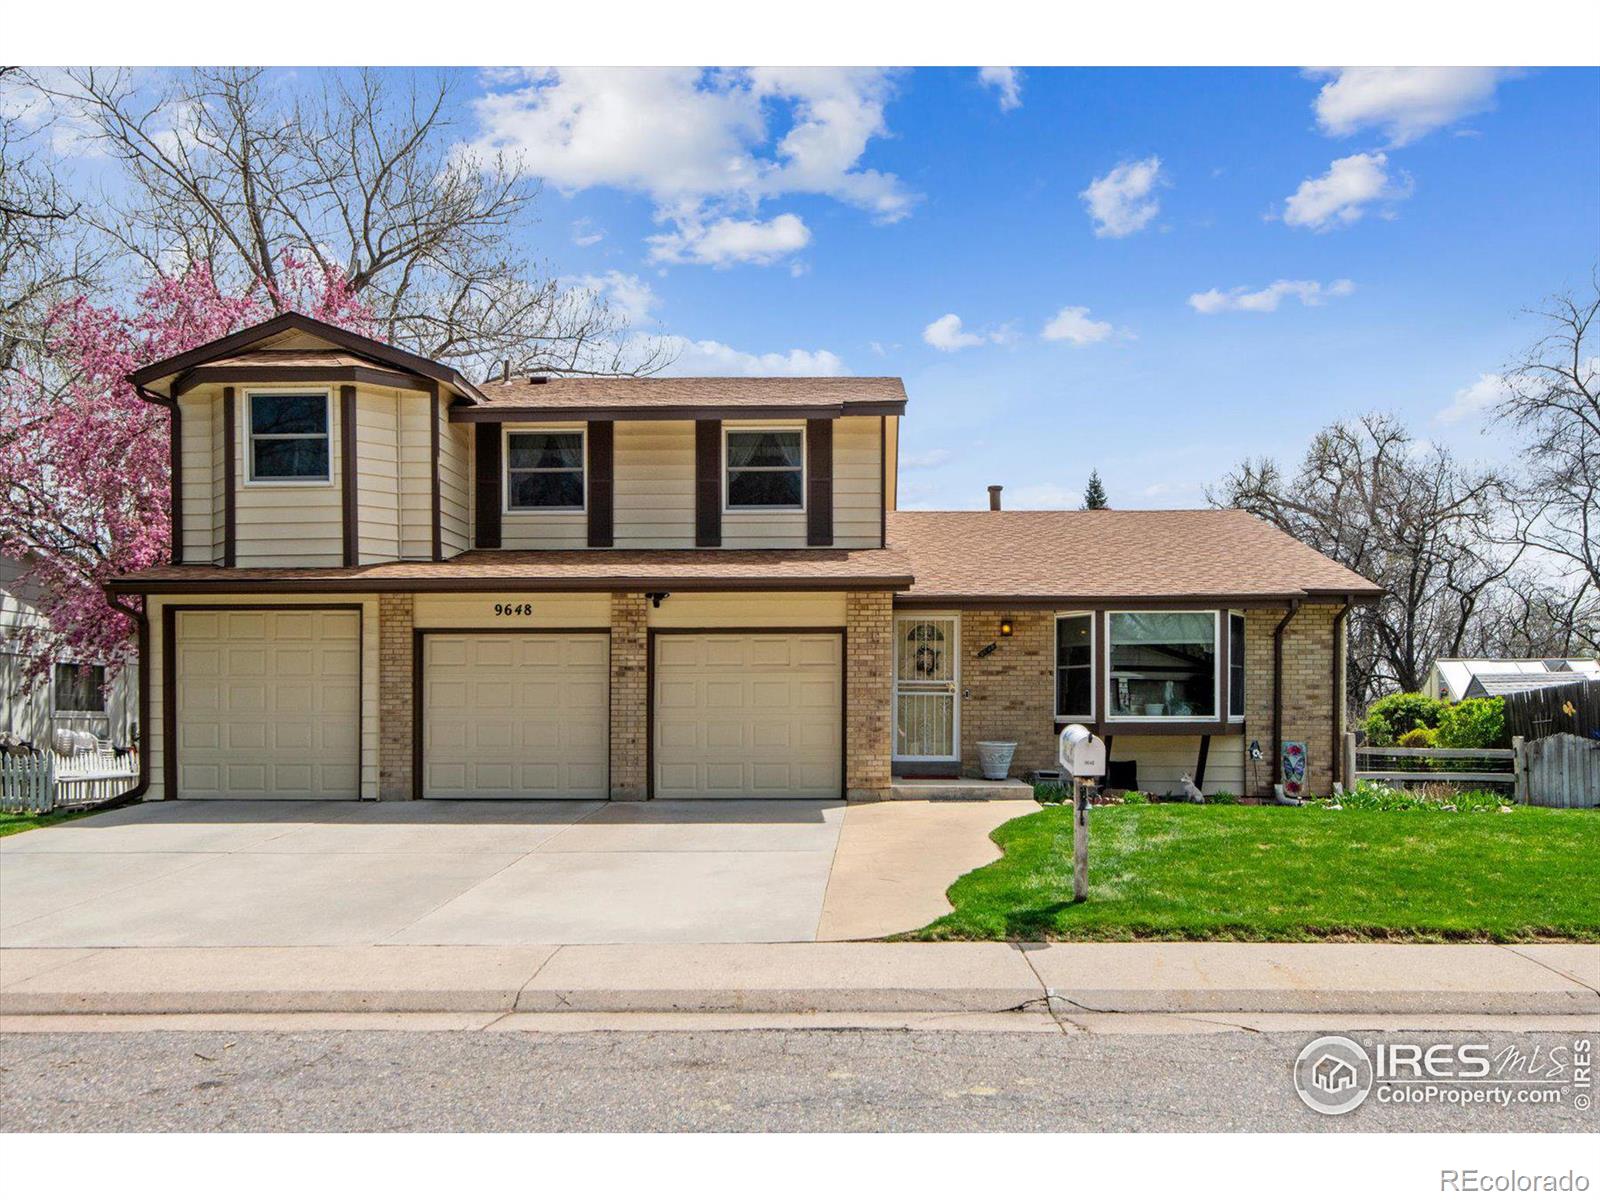 9648 W 74th Place, arvada MLS: 4567891007966 Beds: 4 Baths: 3 Price: $650,000